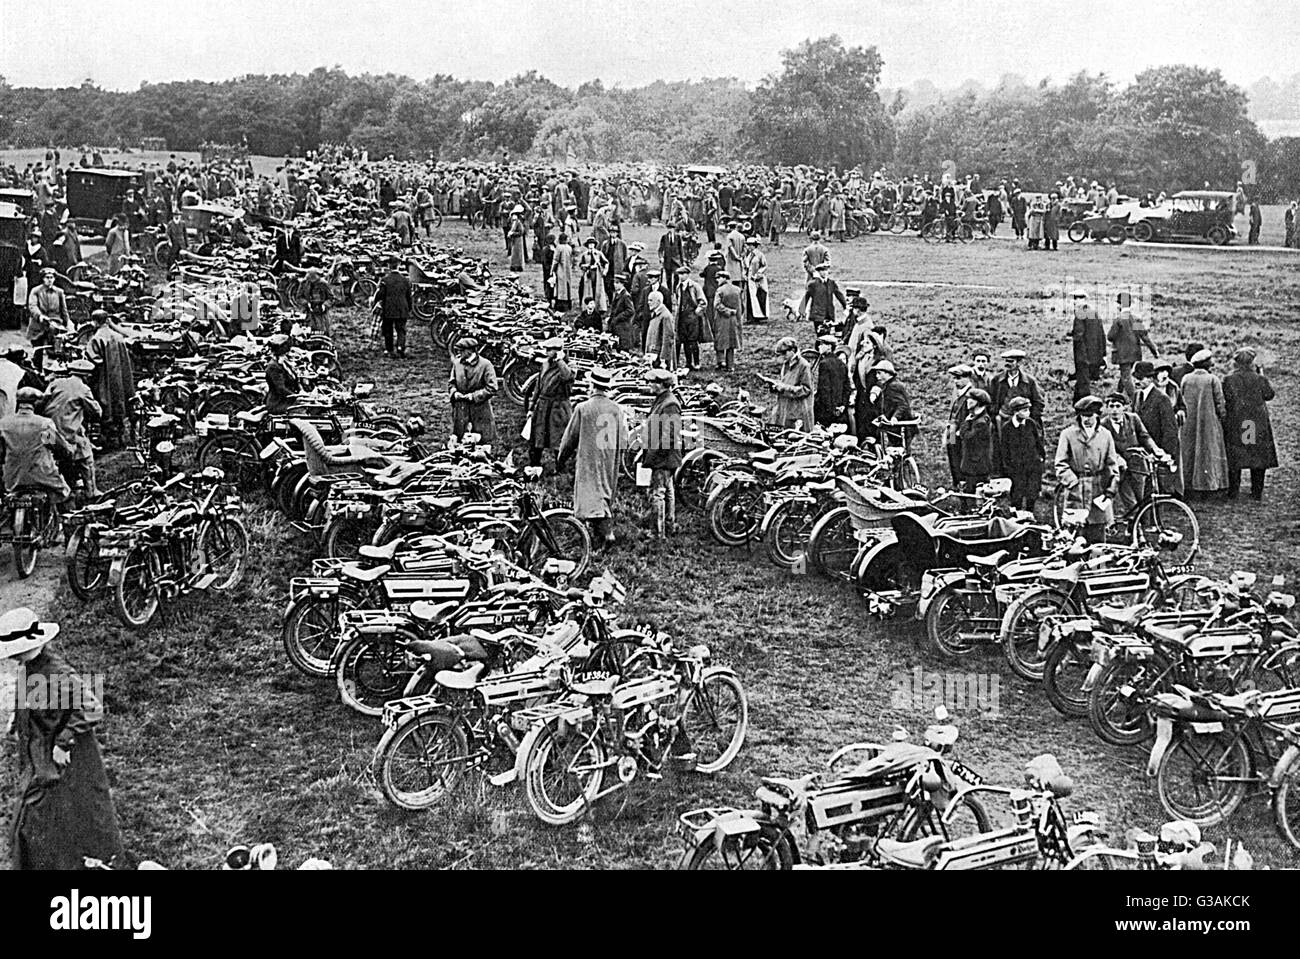 Fleets of motorcyles at the outbreak of war Stock Photo